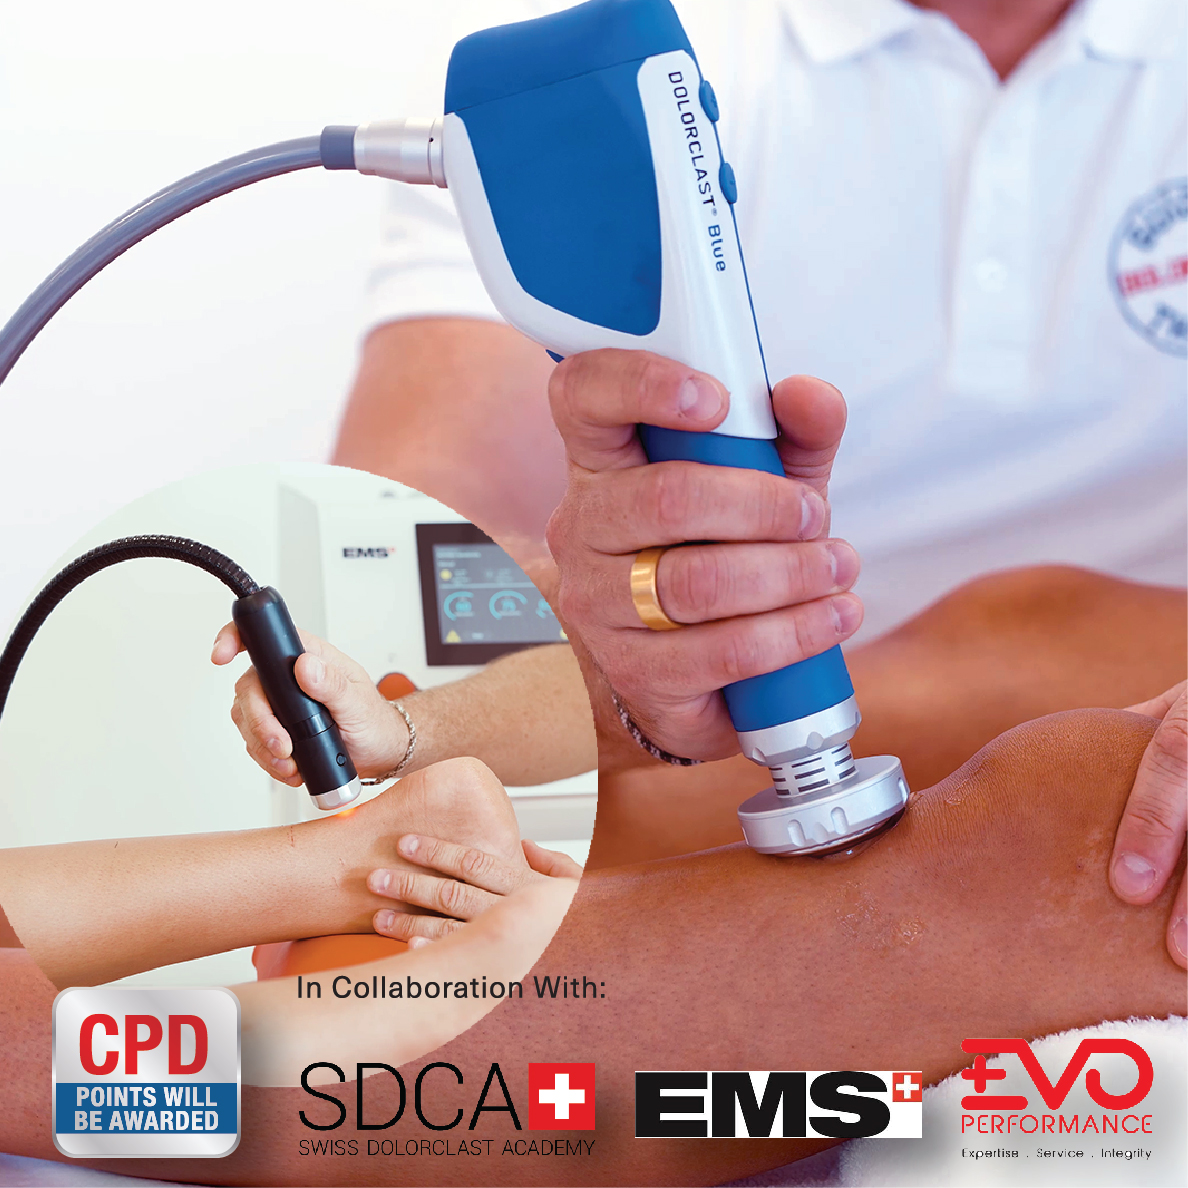 LEVEL 2 CERTIFICATION WORKSHOP: Advanced Shockwave and Laser Guided Approach with Differential Diagnosis and Precise Anatomy Assessments